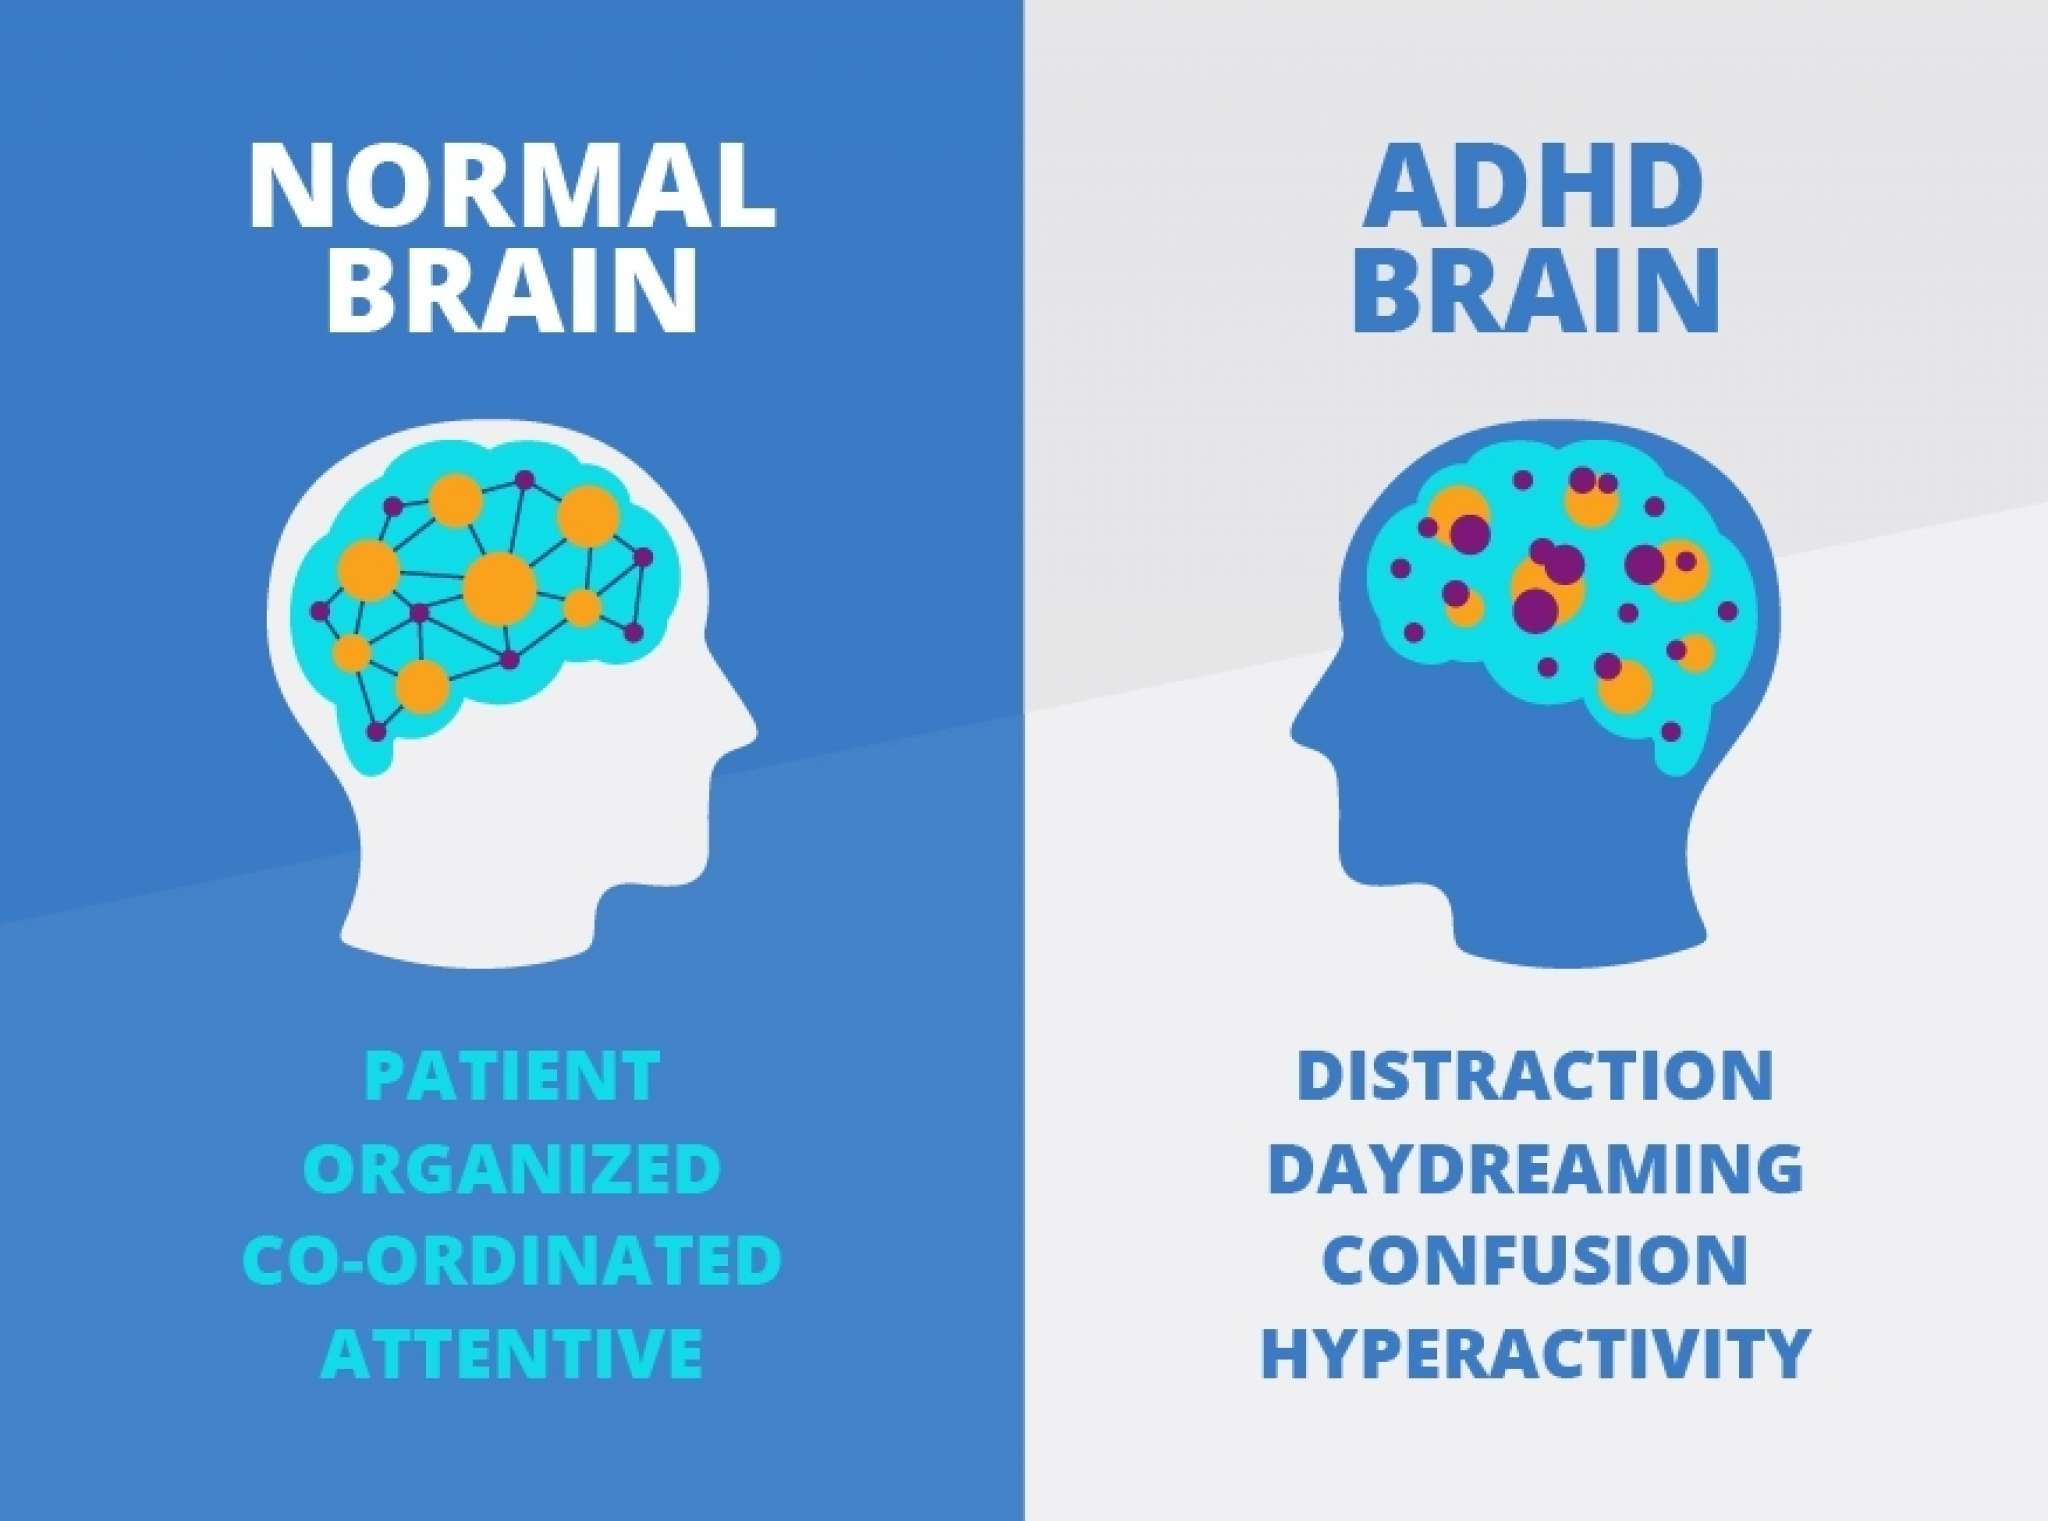 difference between add and adhd reddit